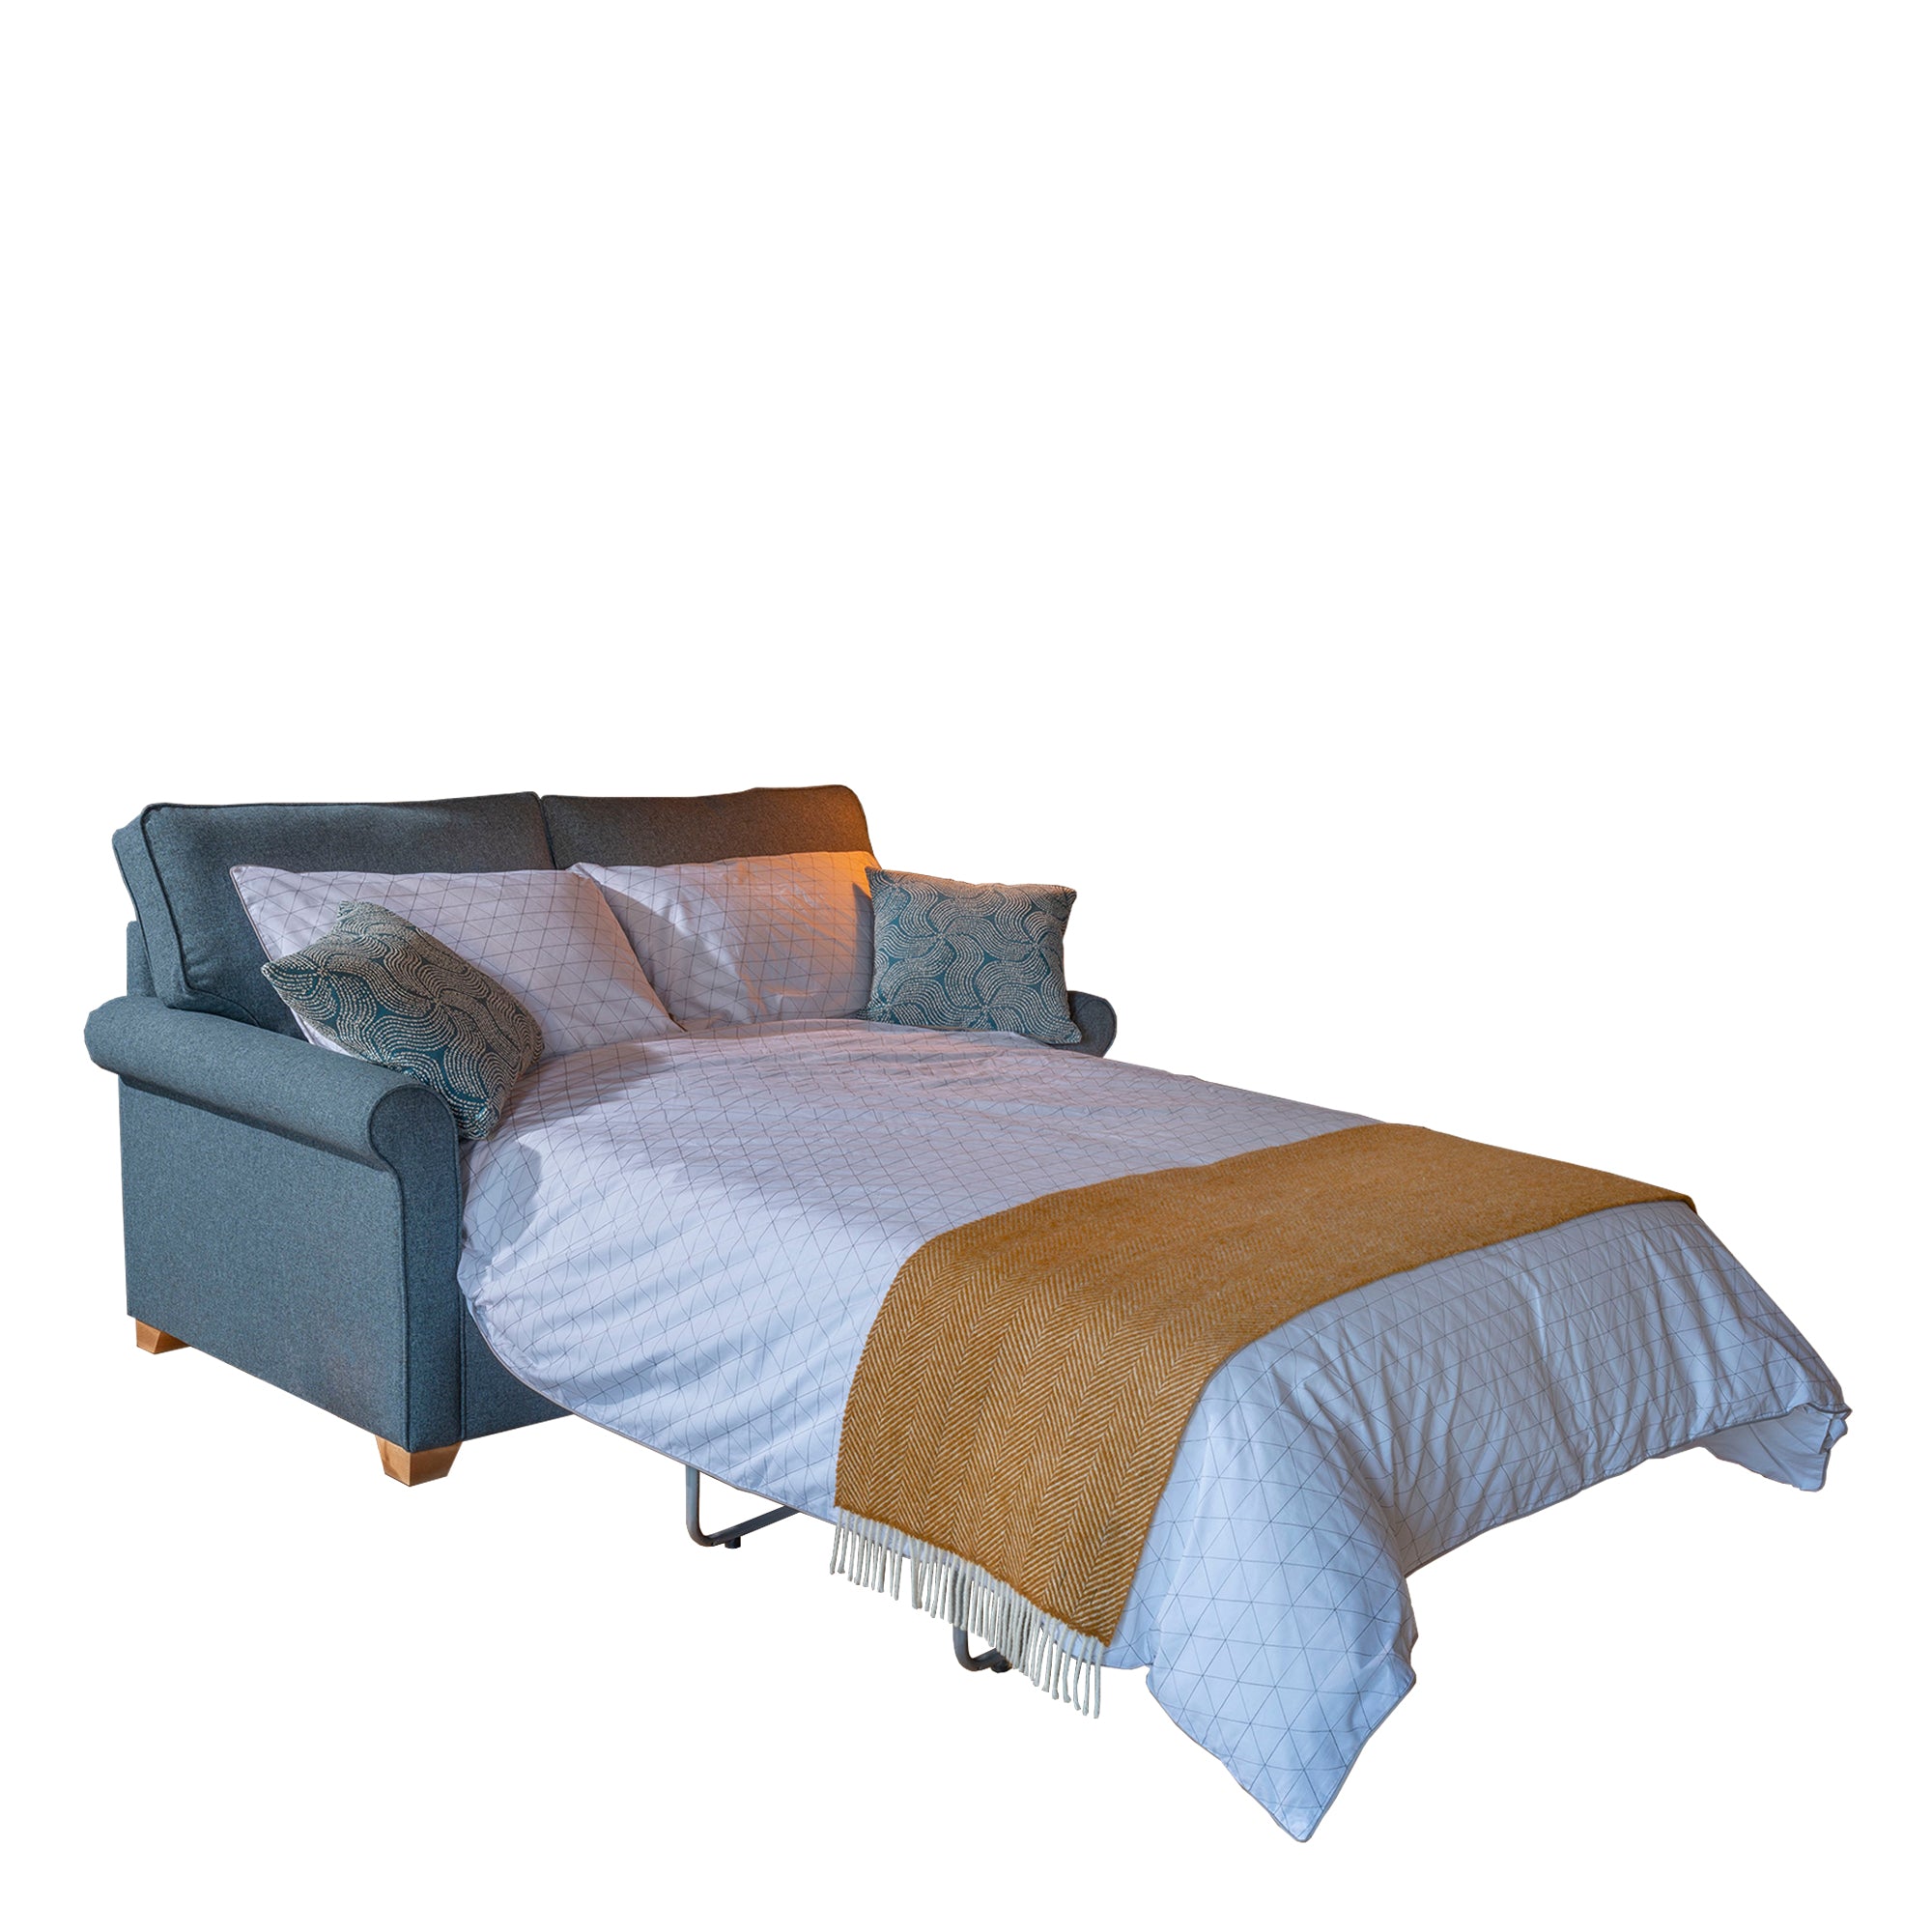 Mabel - 2 Seat Sofa Bed In Fabric With Regal Matress Grade SE